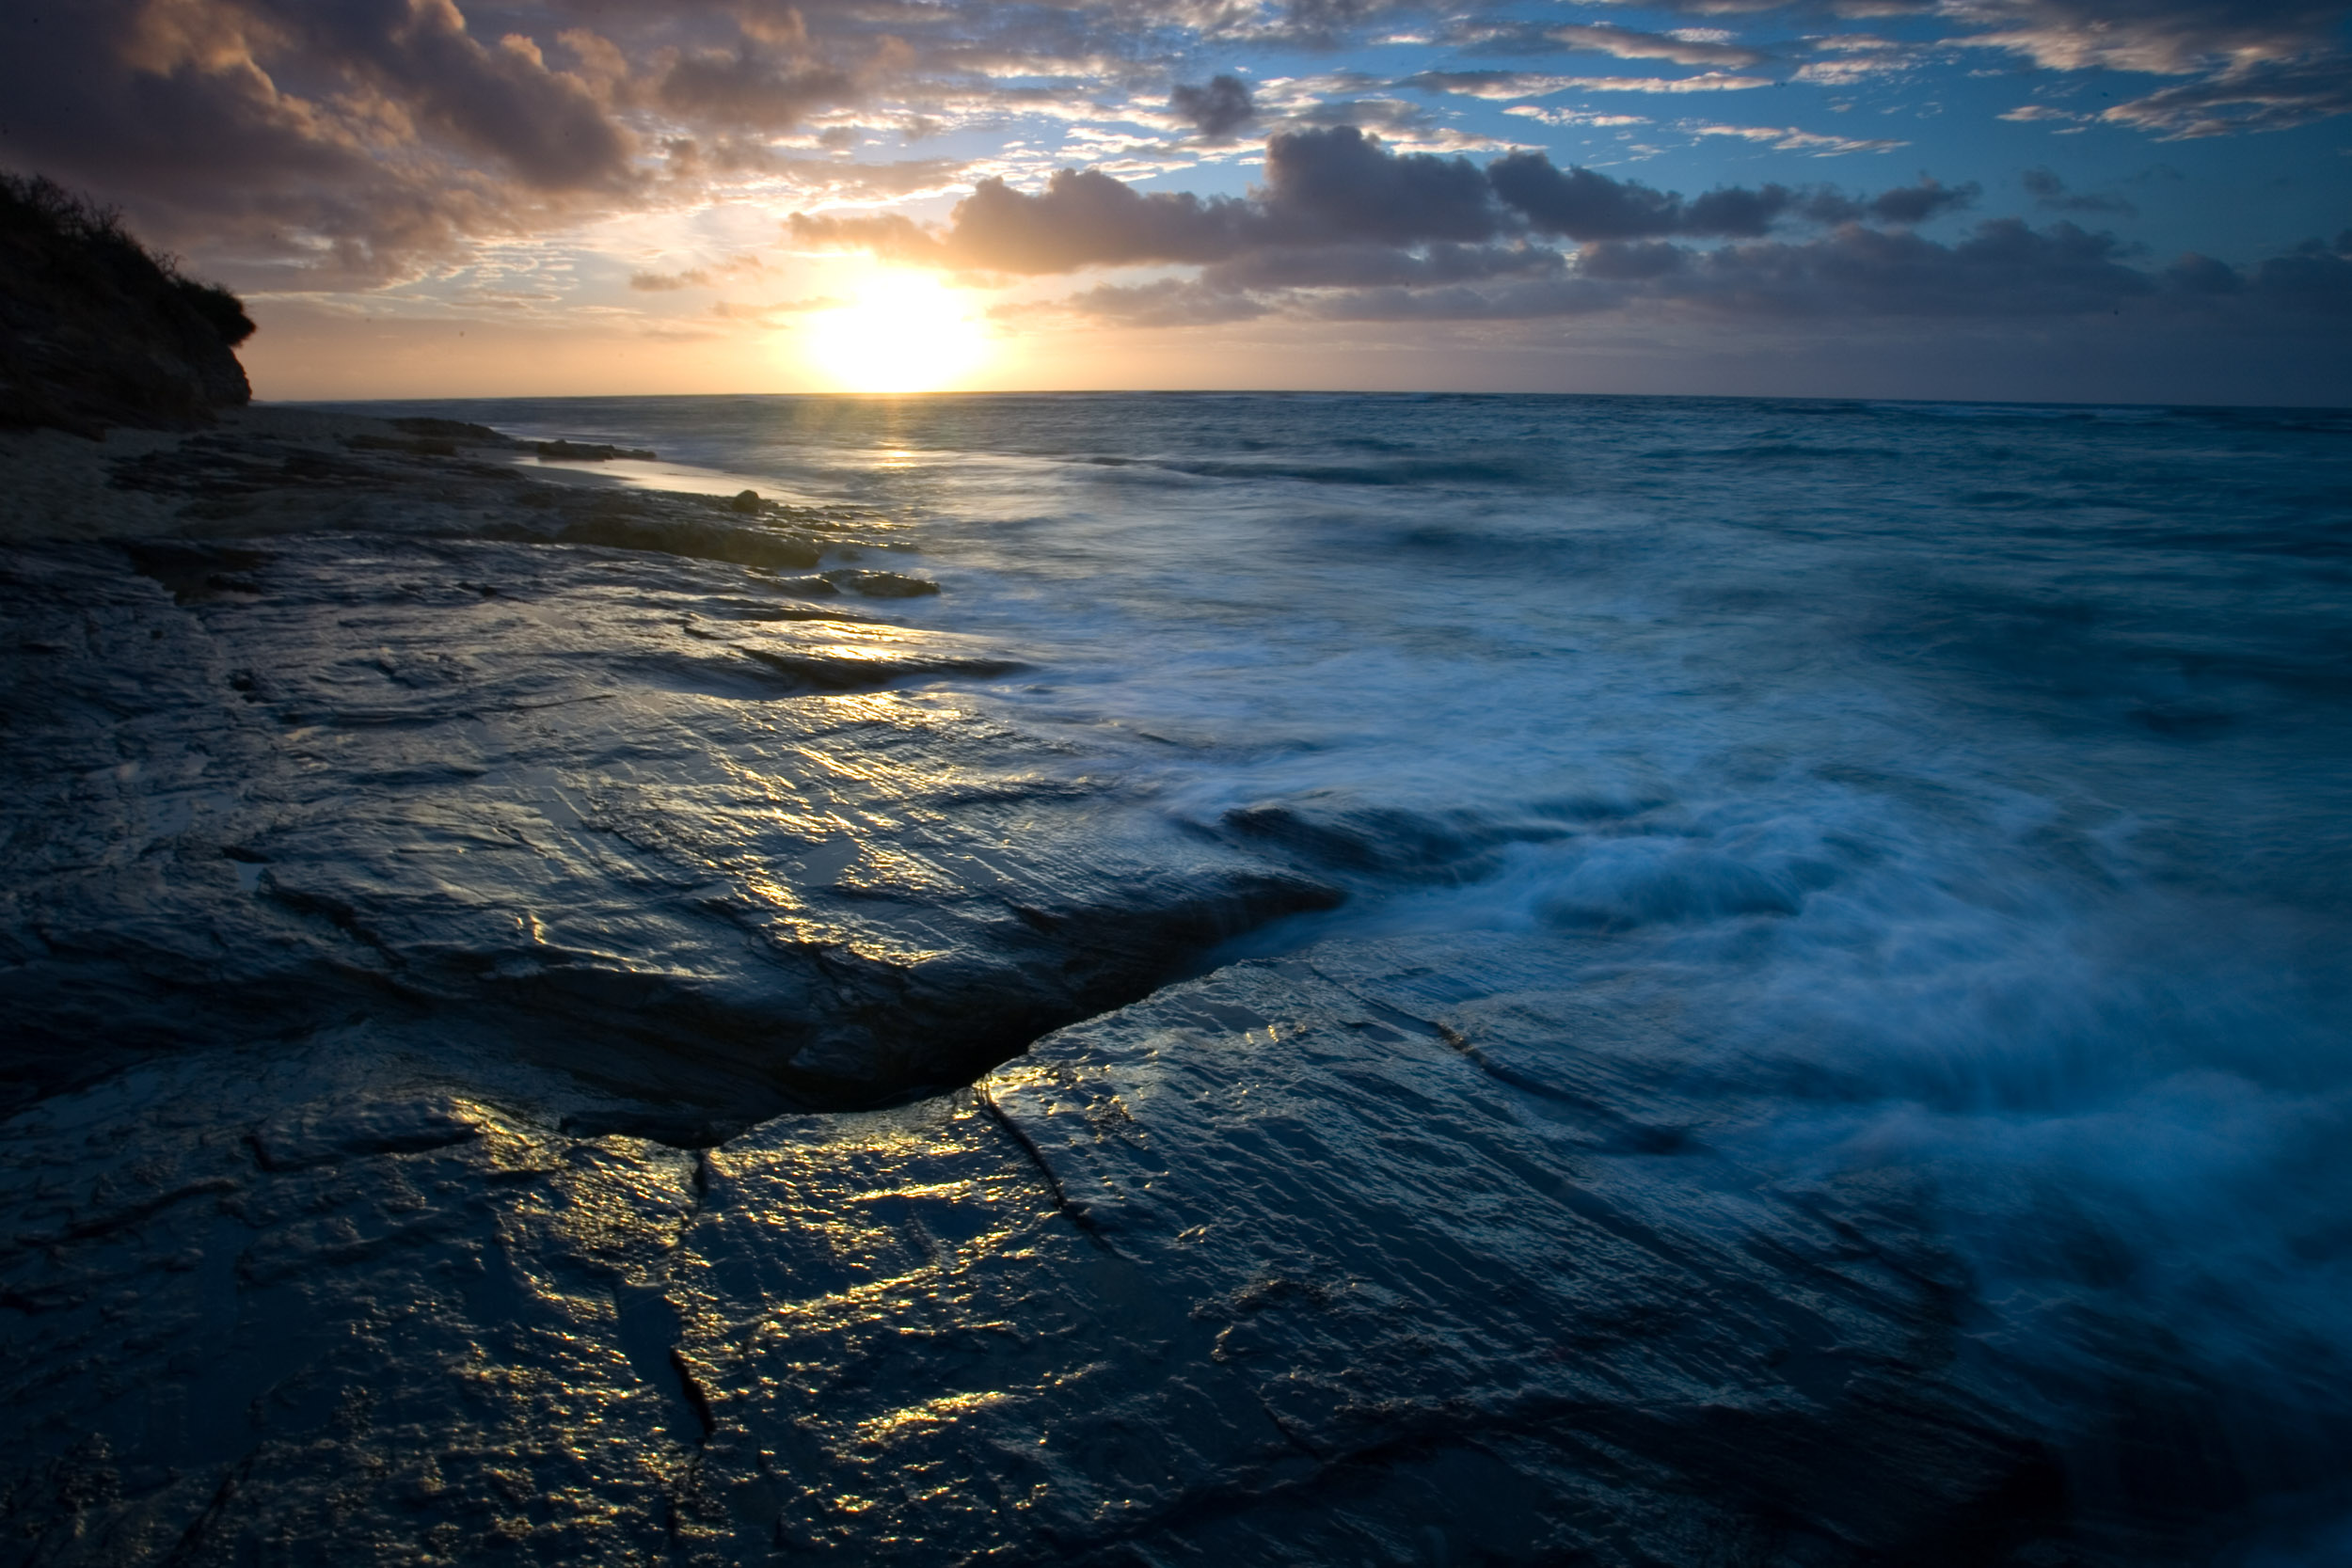 Gentle waves caress the aged rocks as the sun rises in Oahu